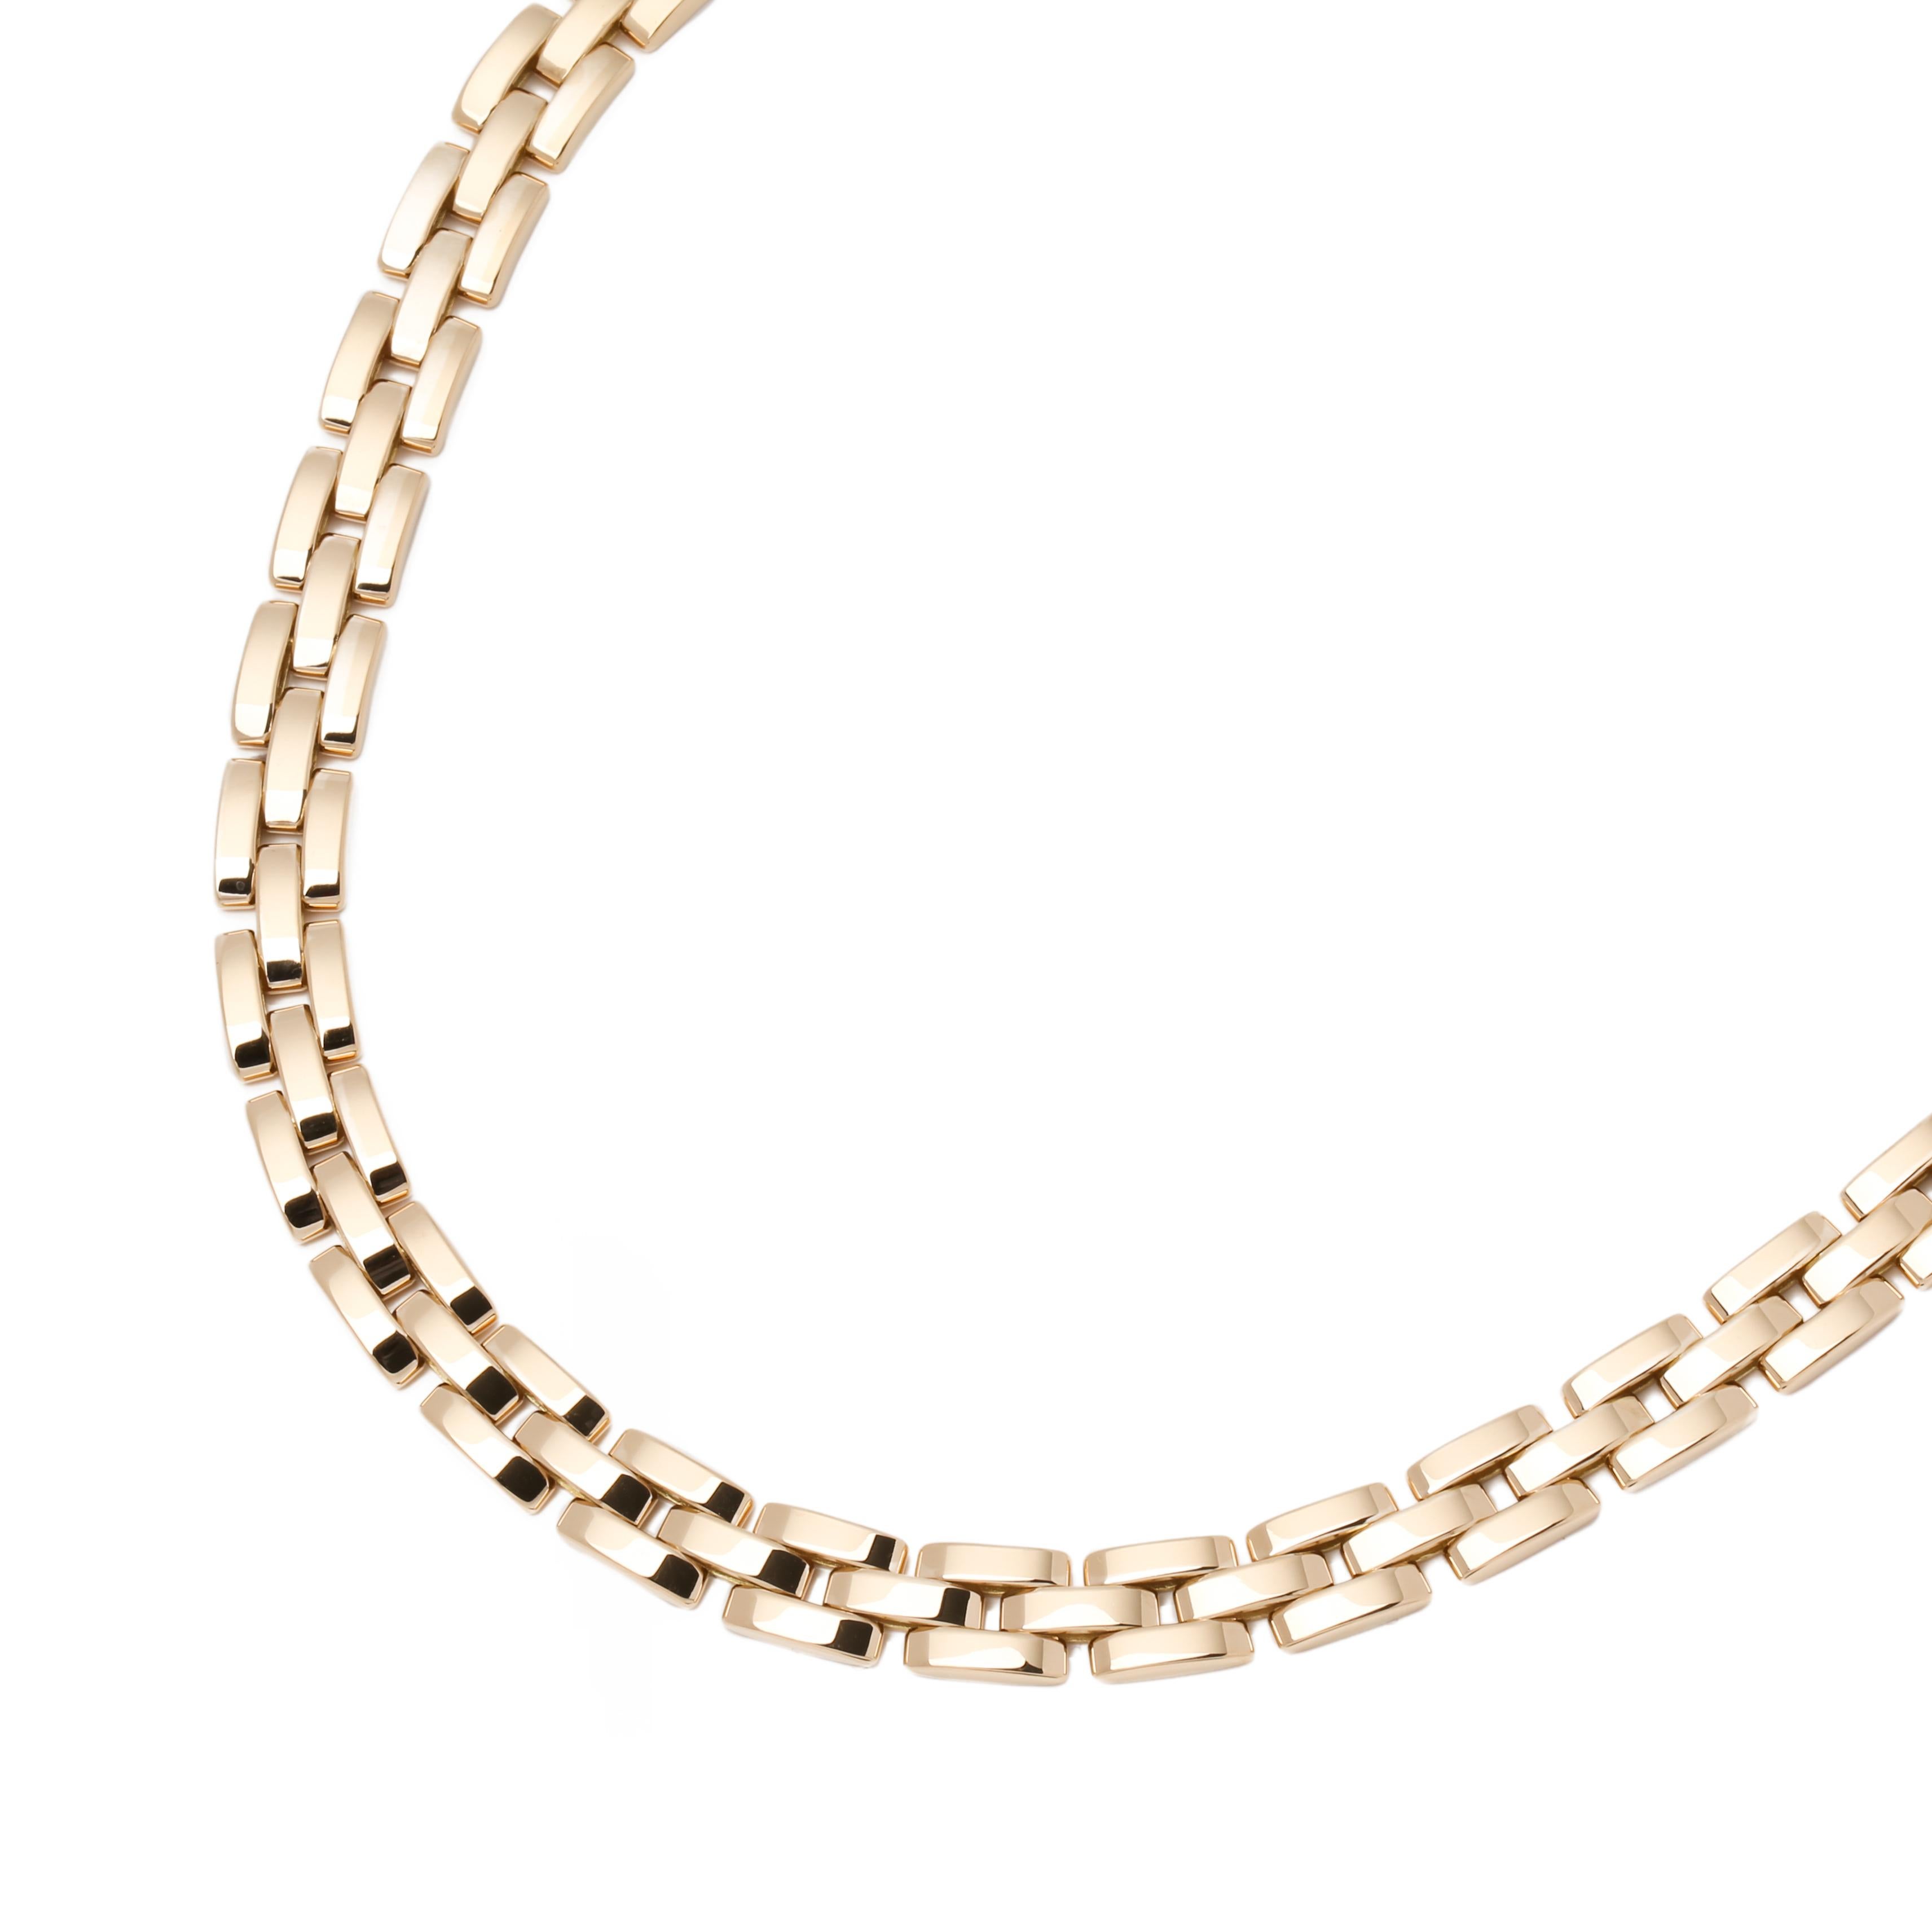 This necklace by Cartier is from their Maillon Panthere collection and features their signature link design made in 18k yellow gold. Accompanied with a Cartier pouch. Our Xupes reference is COMJ510 should you need to quote this. 